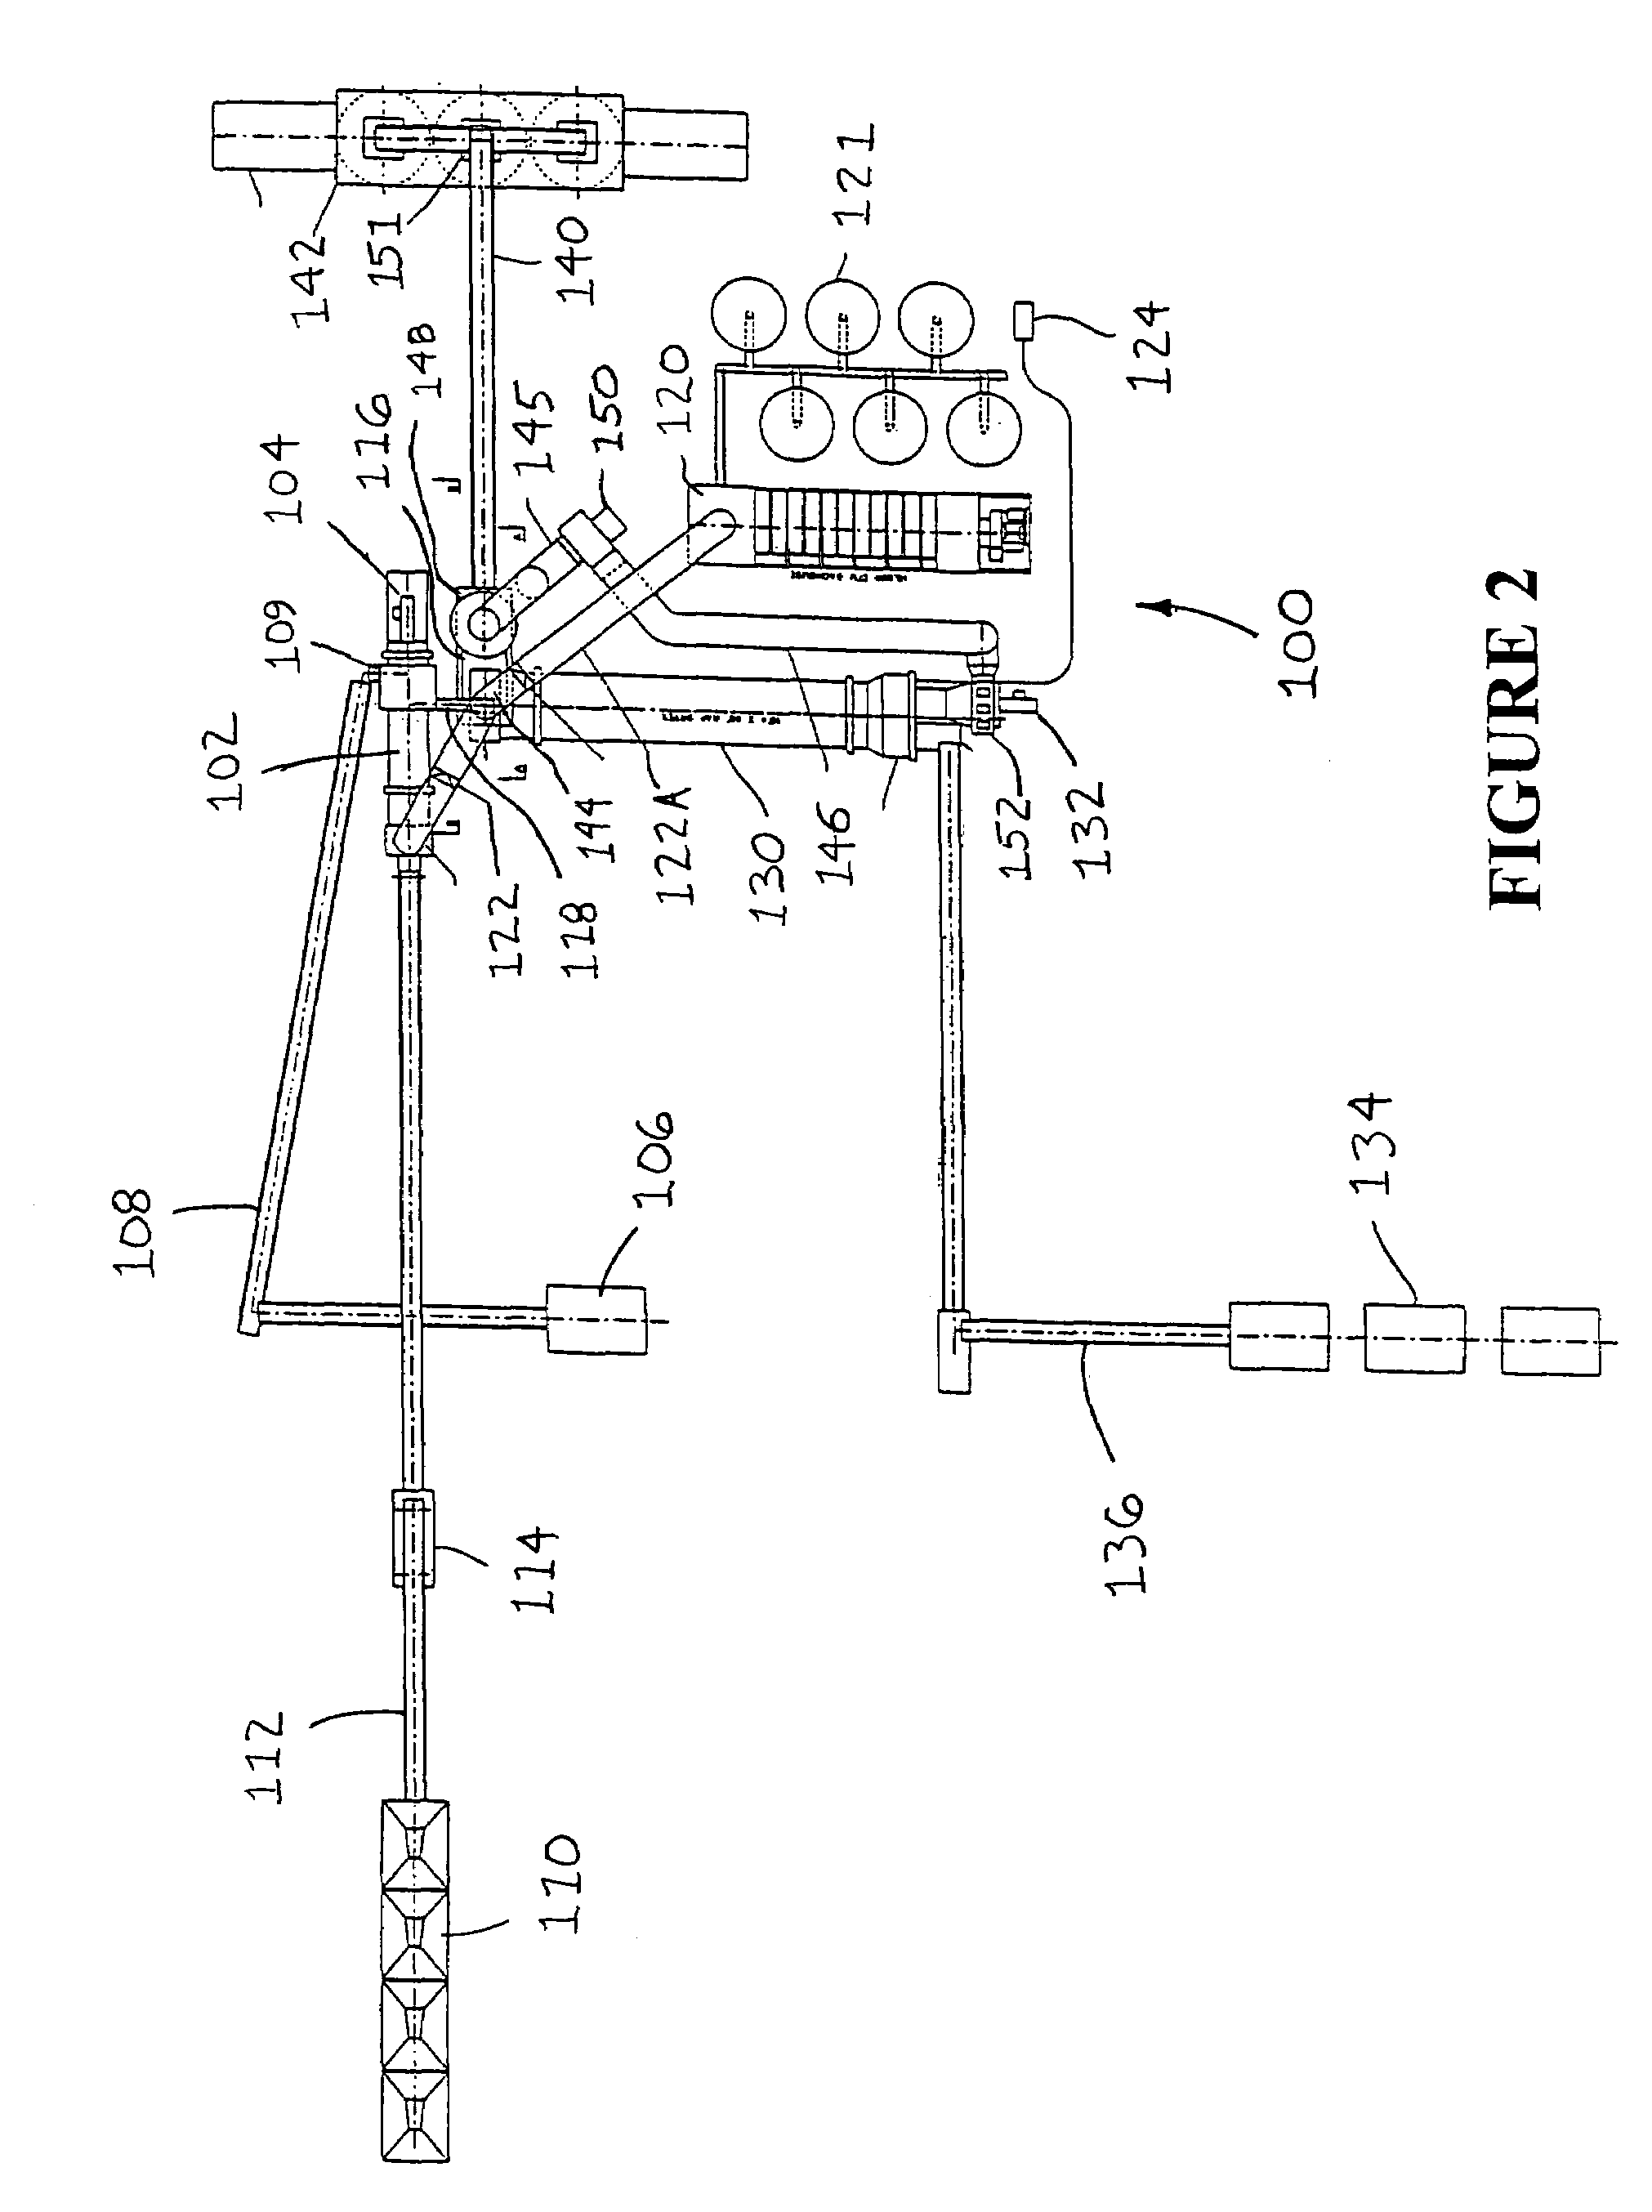 Apparatus and method for a hot mix asphalt plant using a high percentage of recycled asphalt products